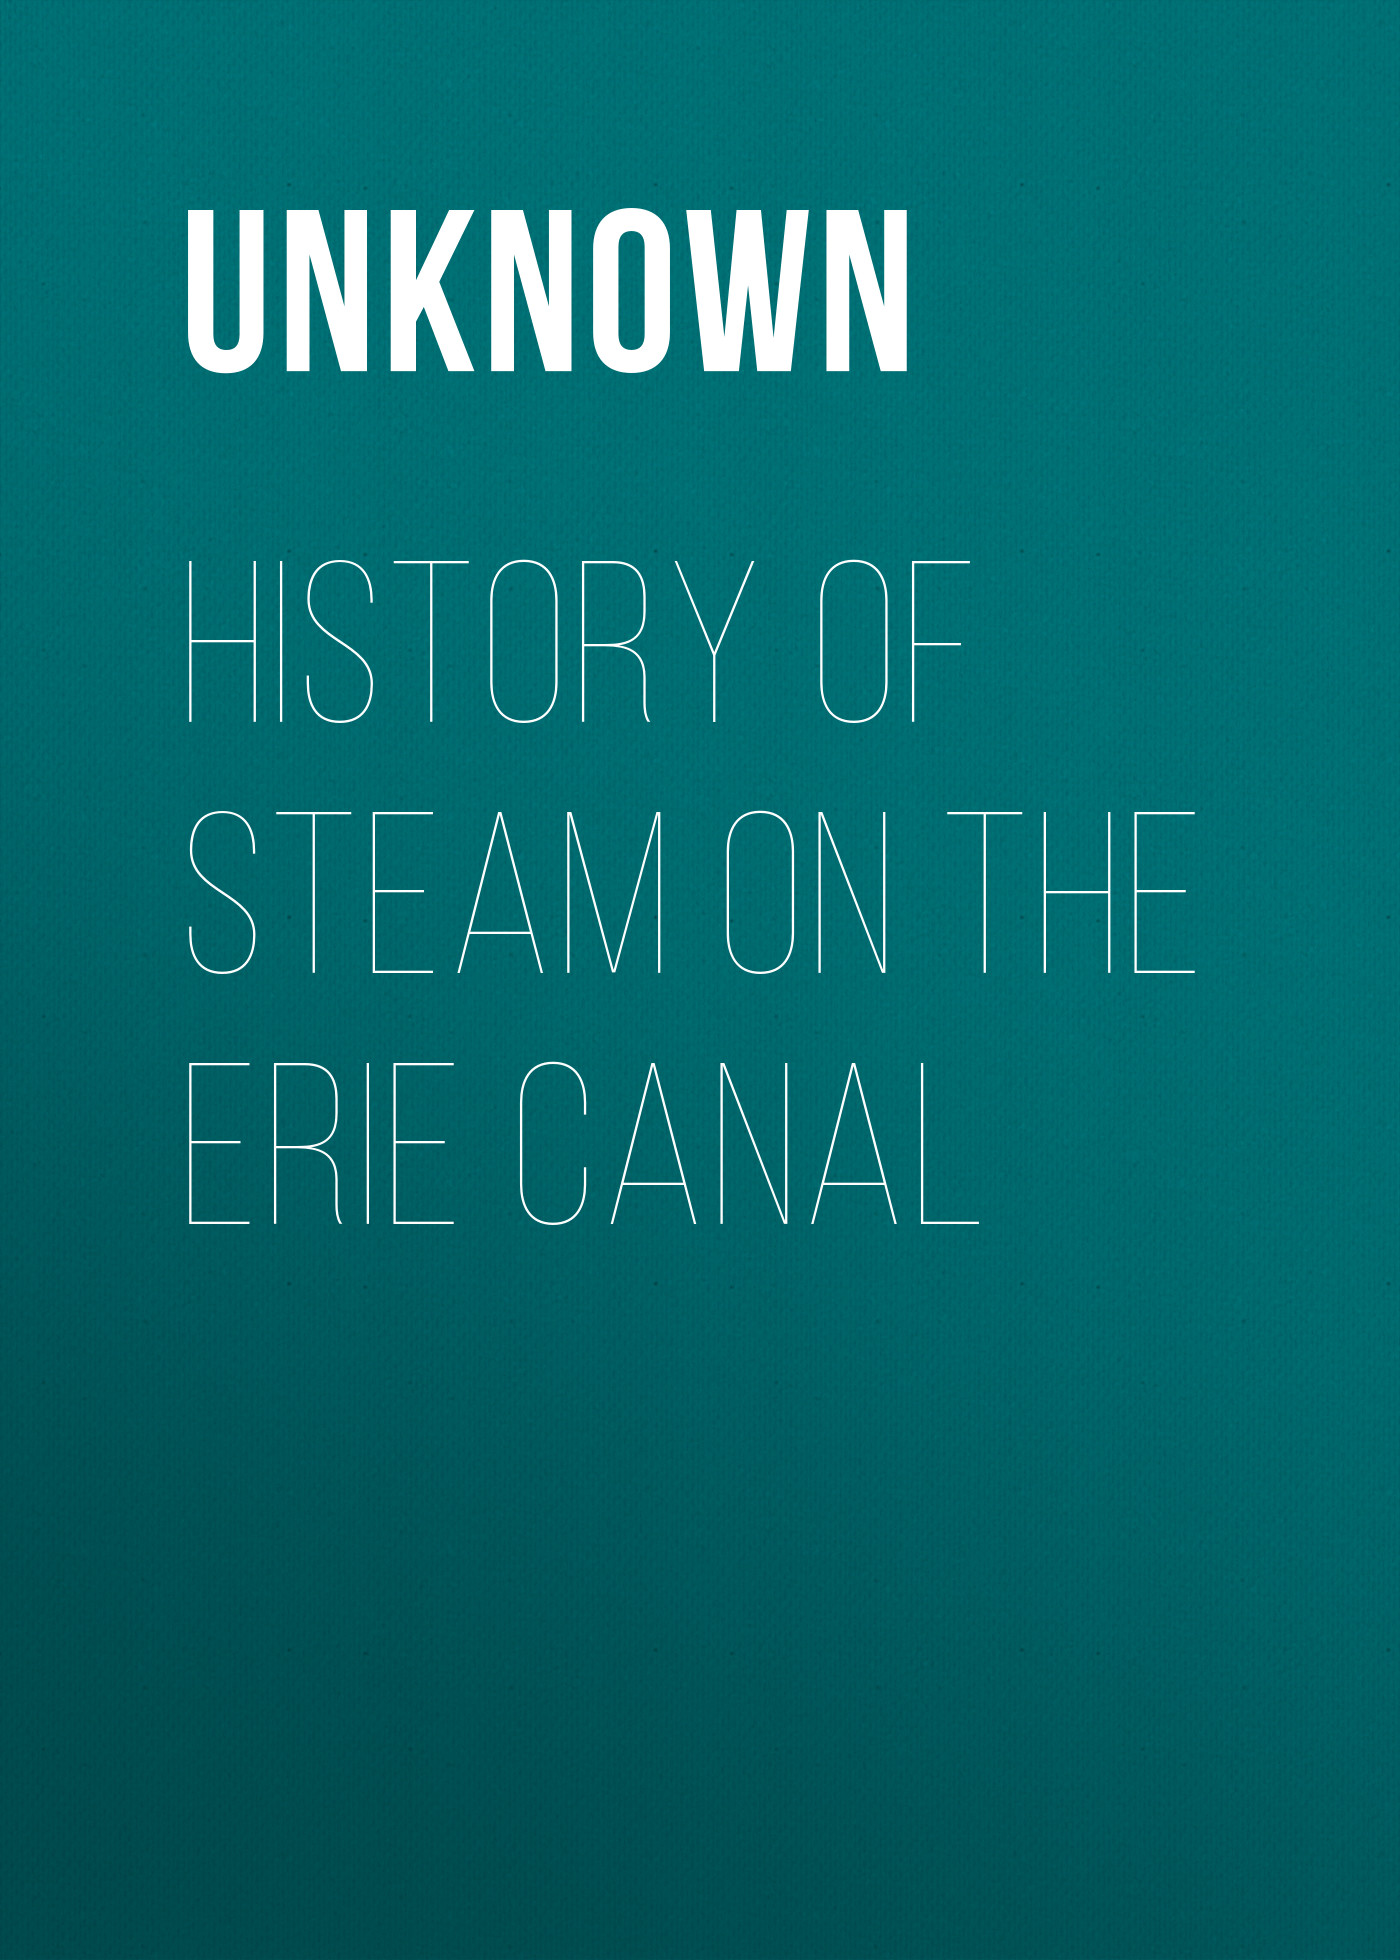 History of Steam on the Erie Canal